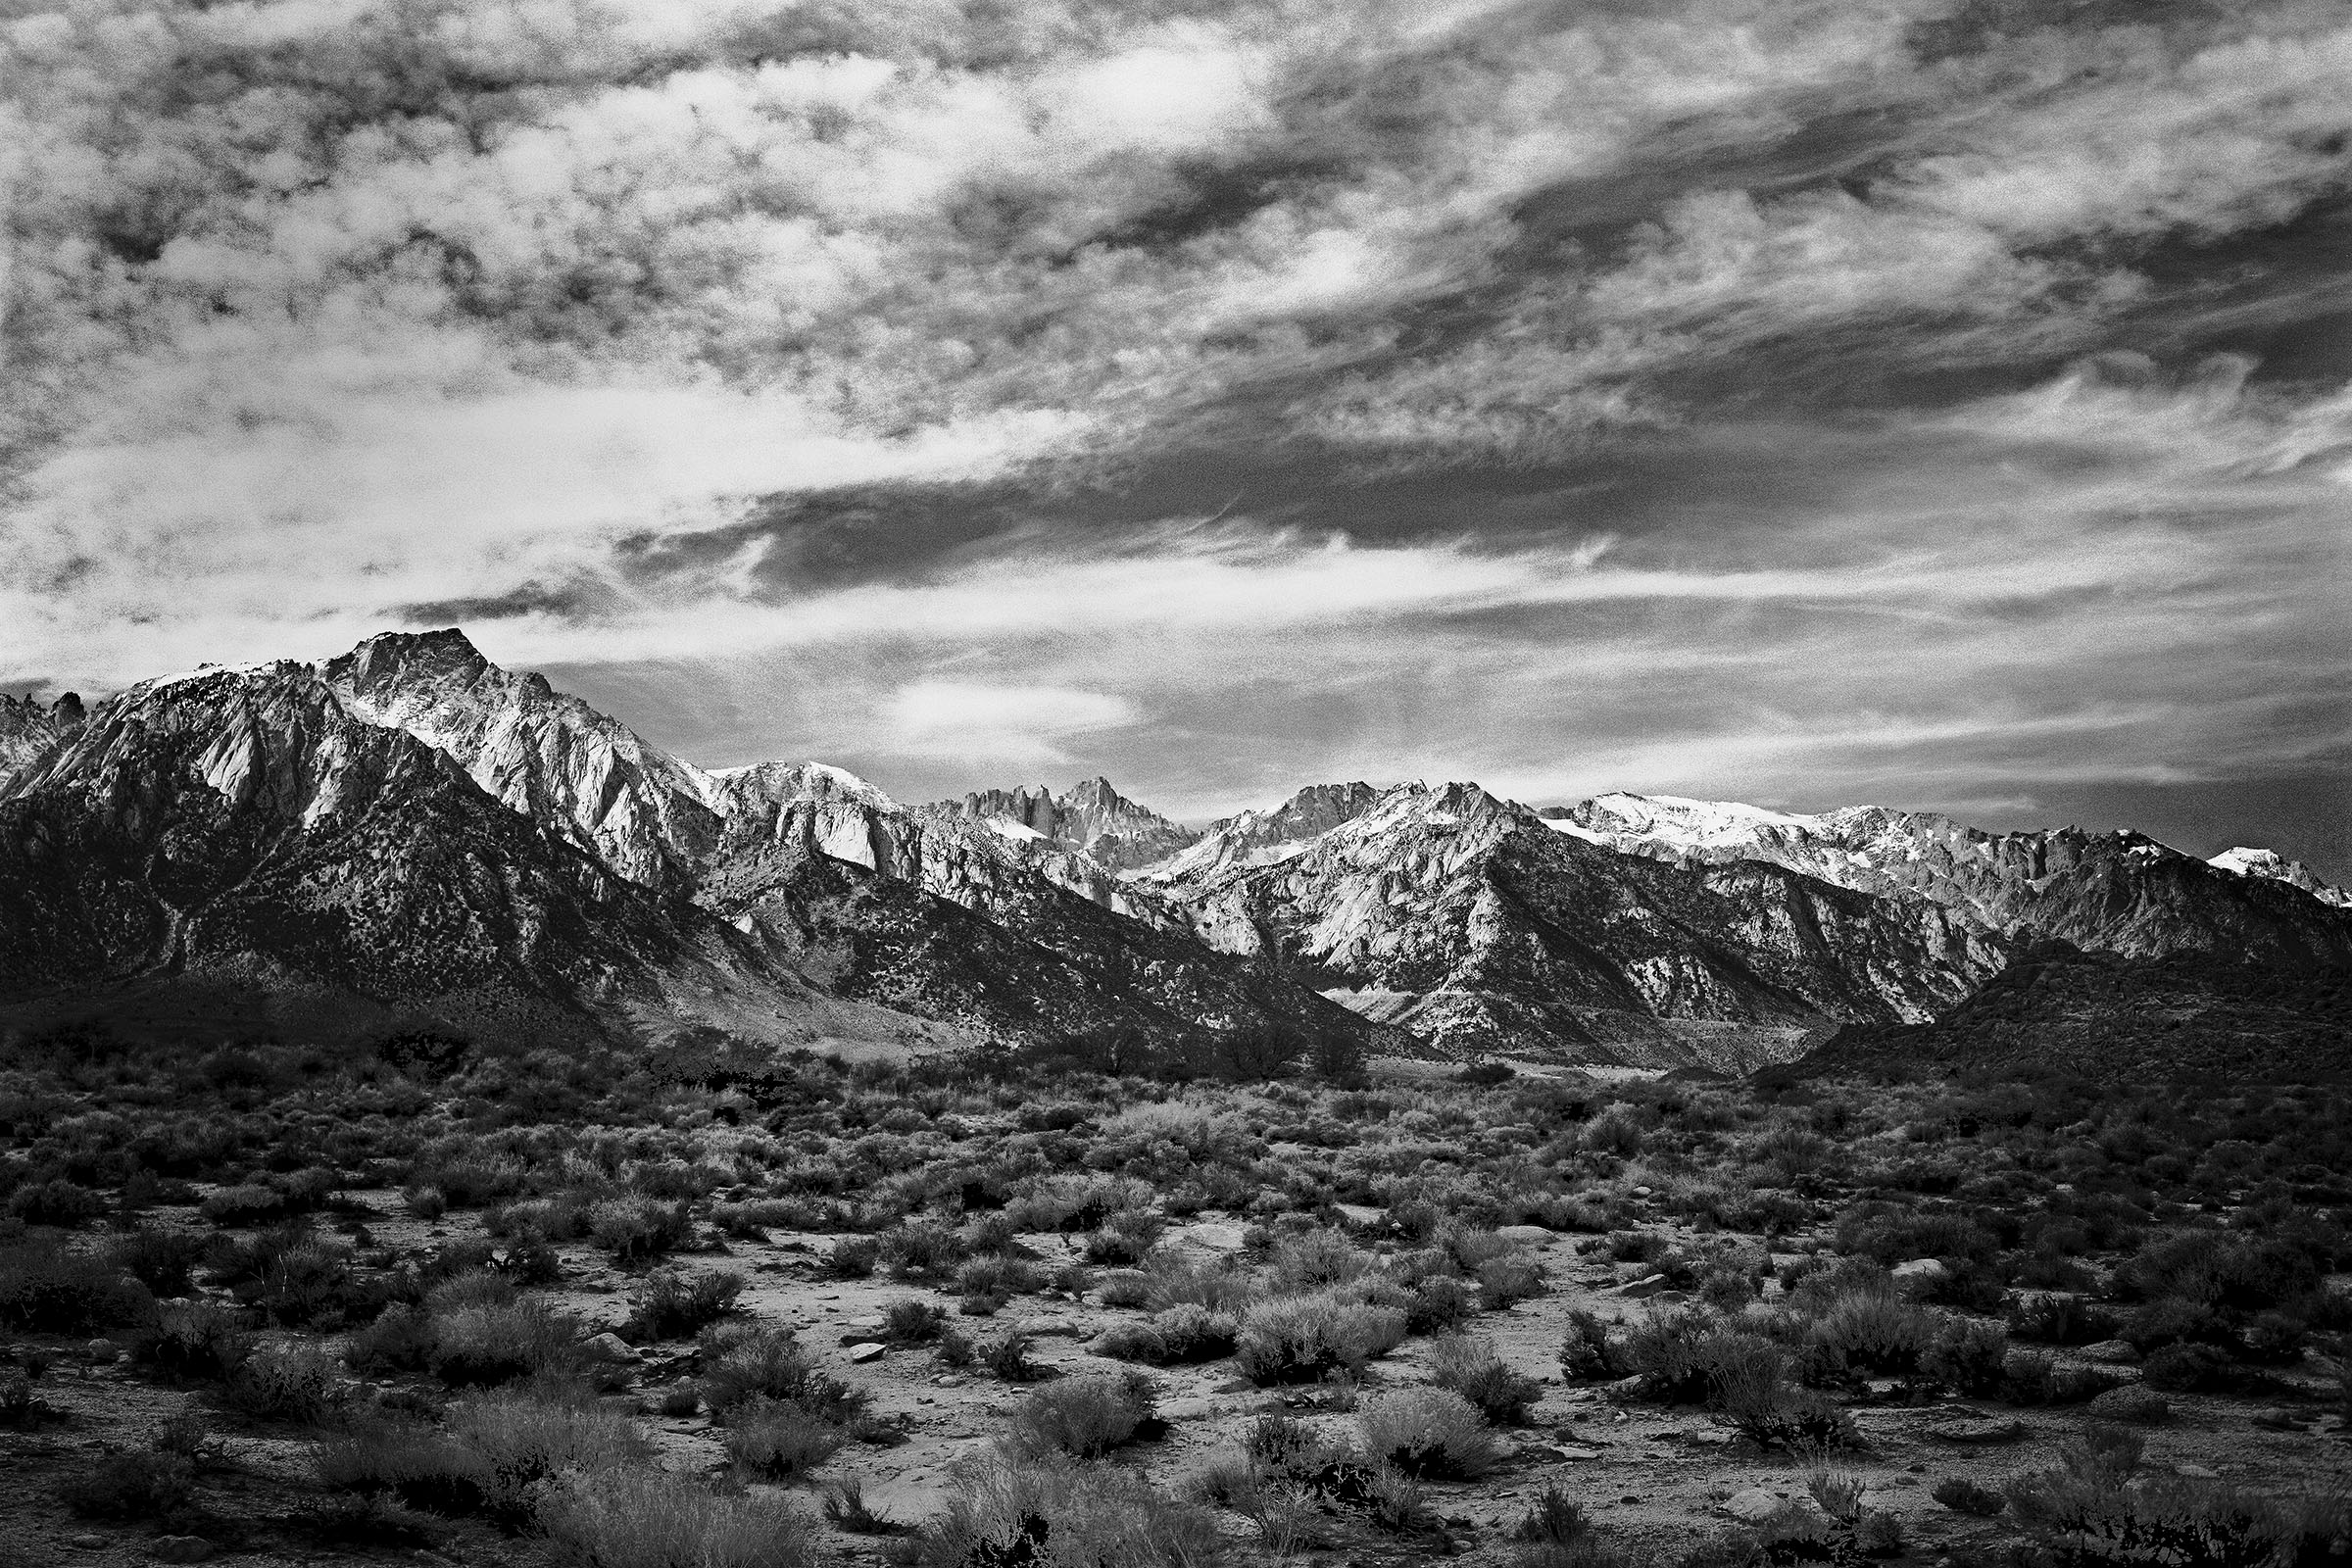 Mt. Whitney from the Alabama Hills Hwy 395 near Lone Pine, CA by Chuck Farmer